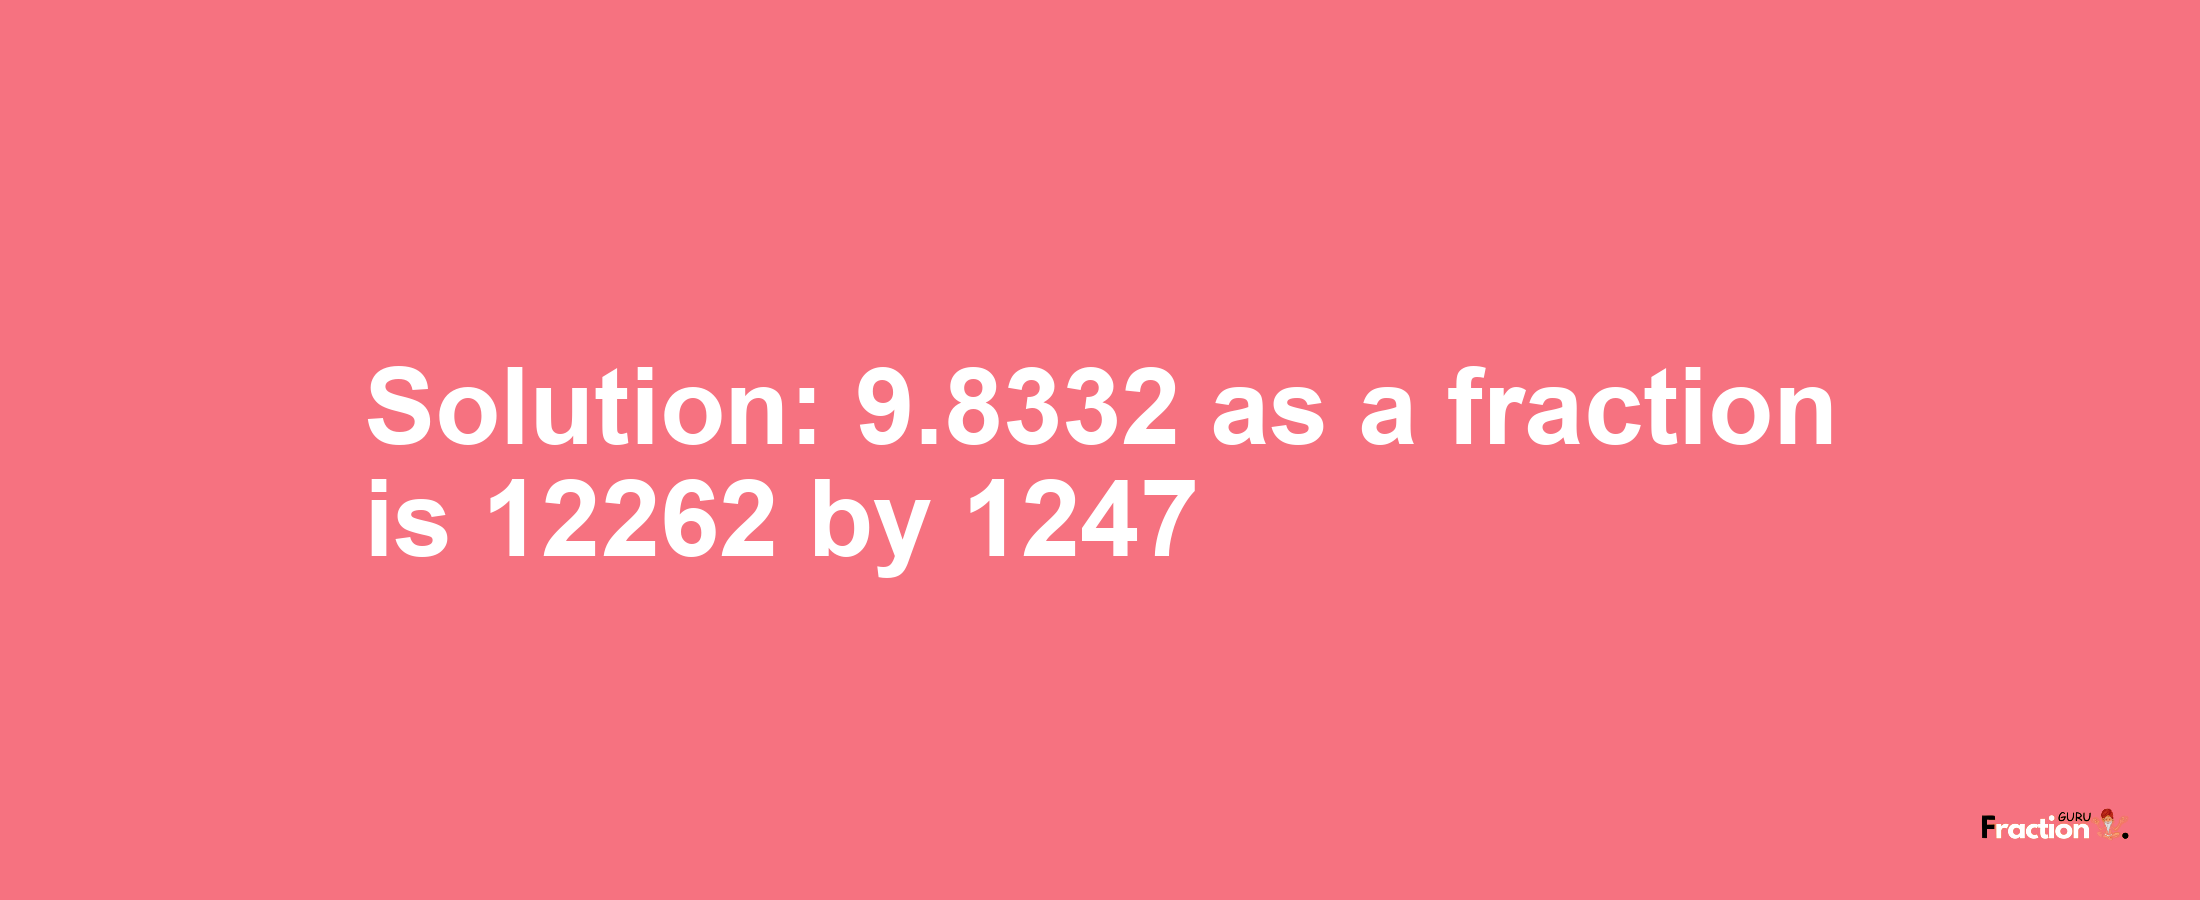 Solution:9.8332 as a fraction is 12262/1247